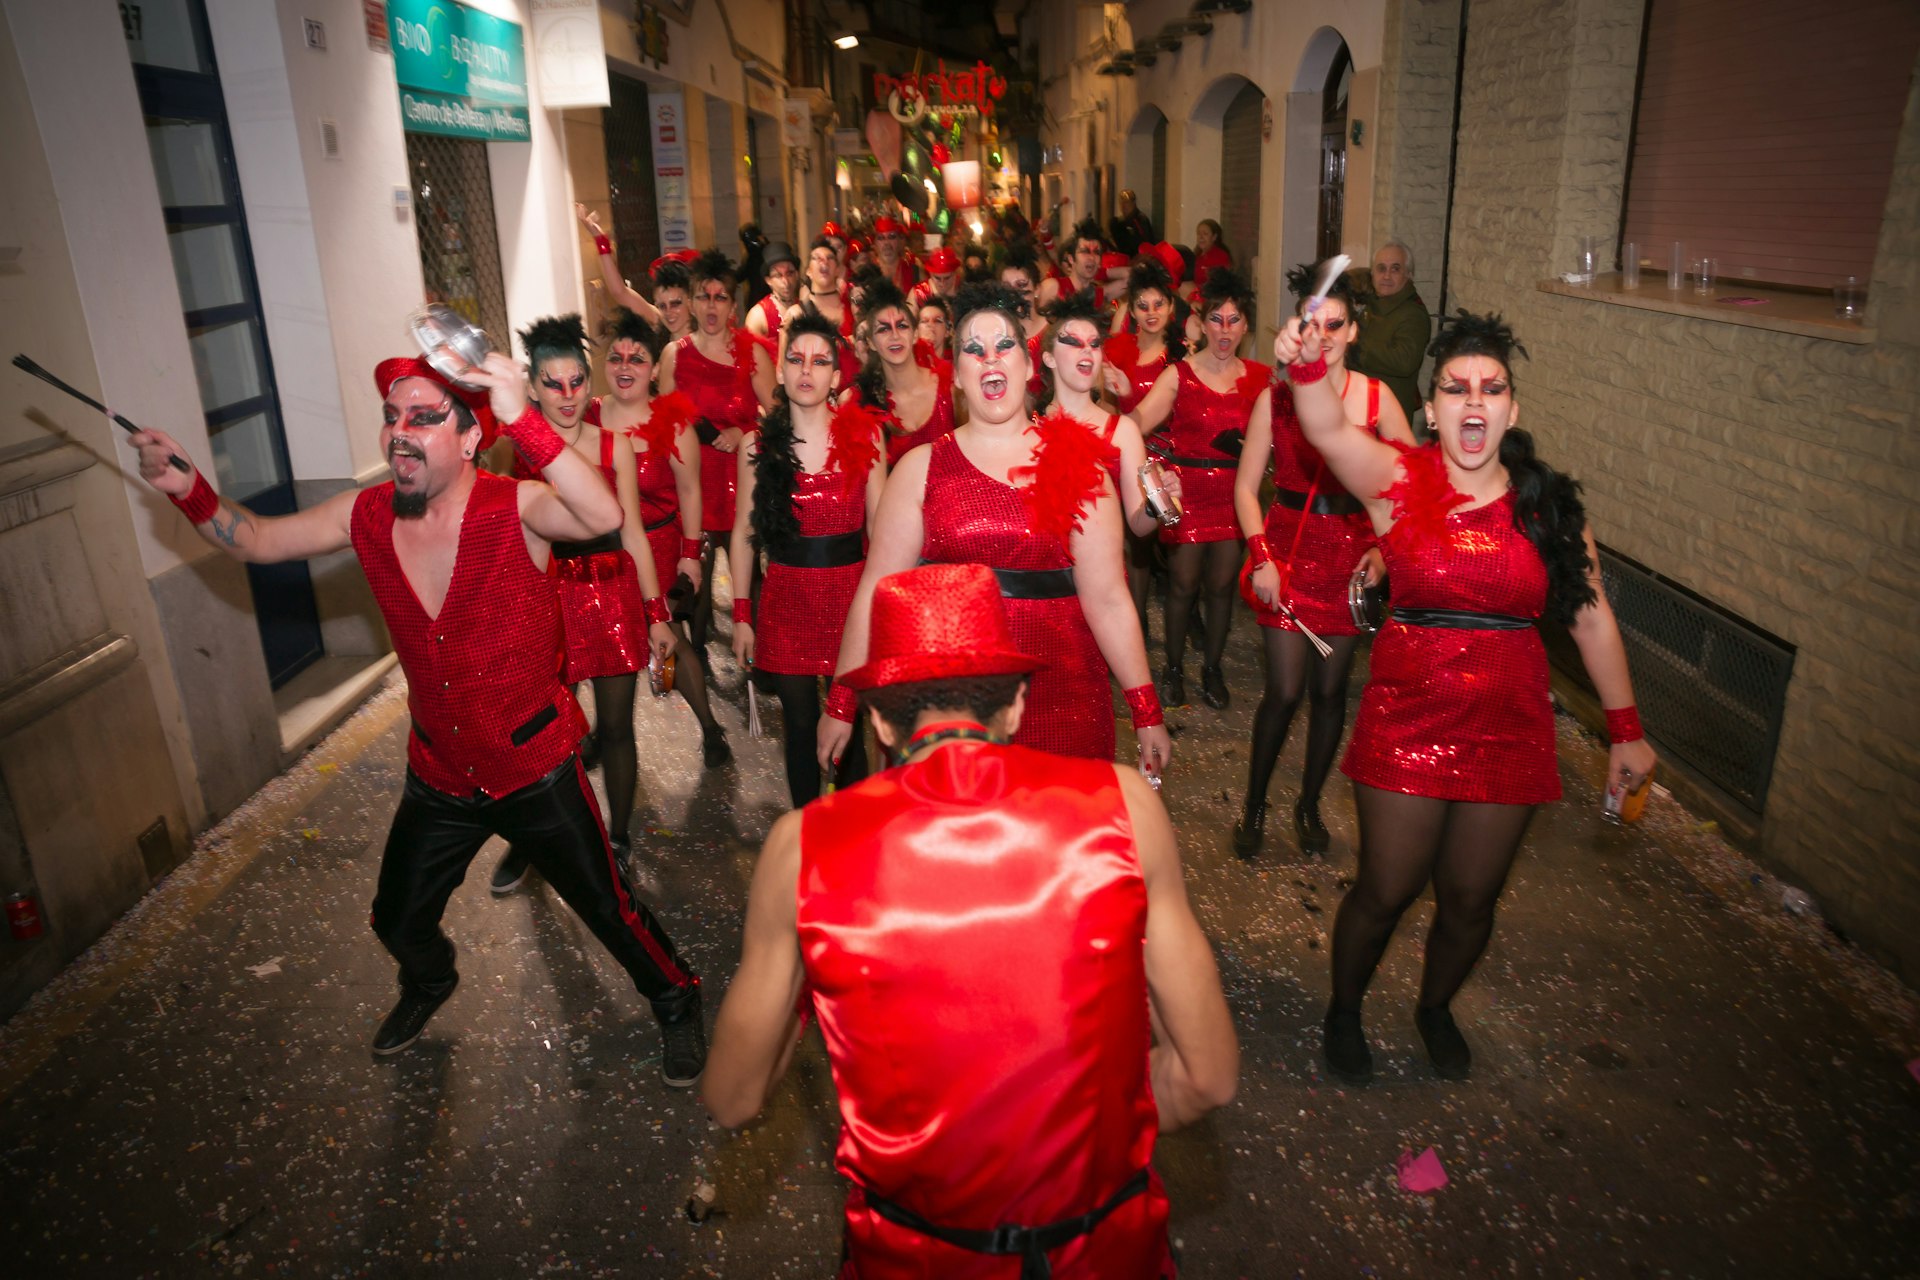 A band of men and women dressed only in red and black at a Carnaval parade